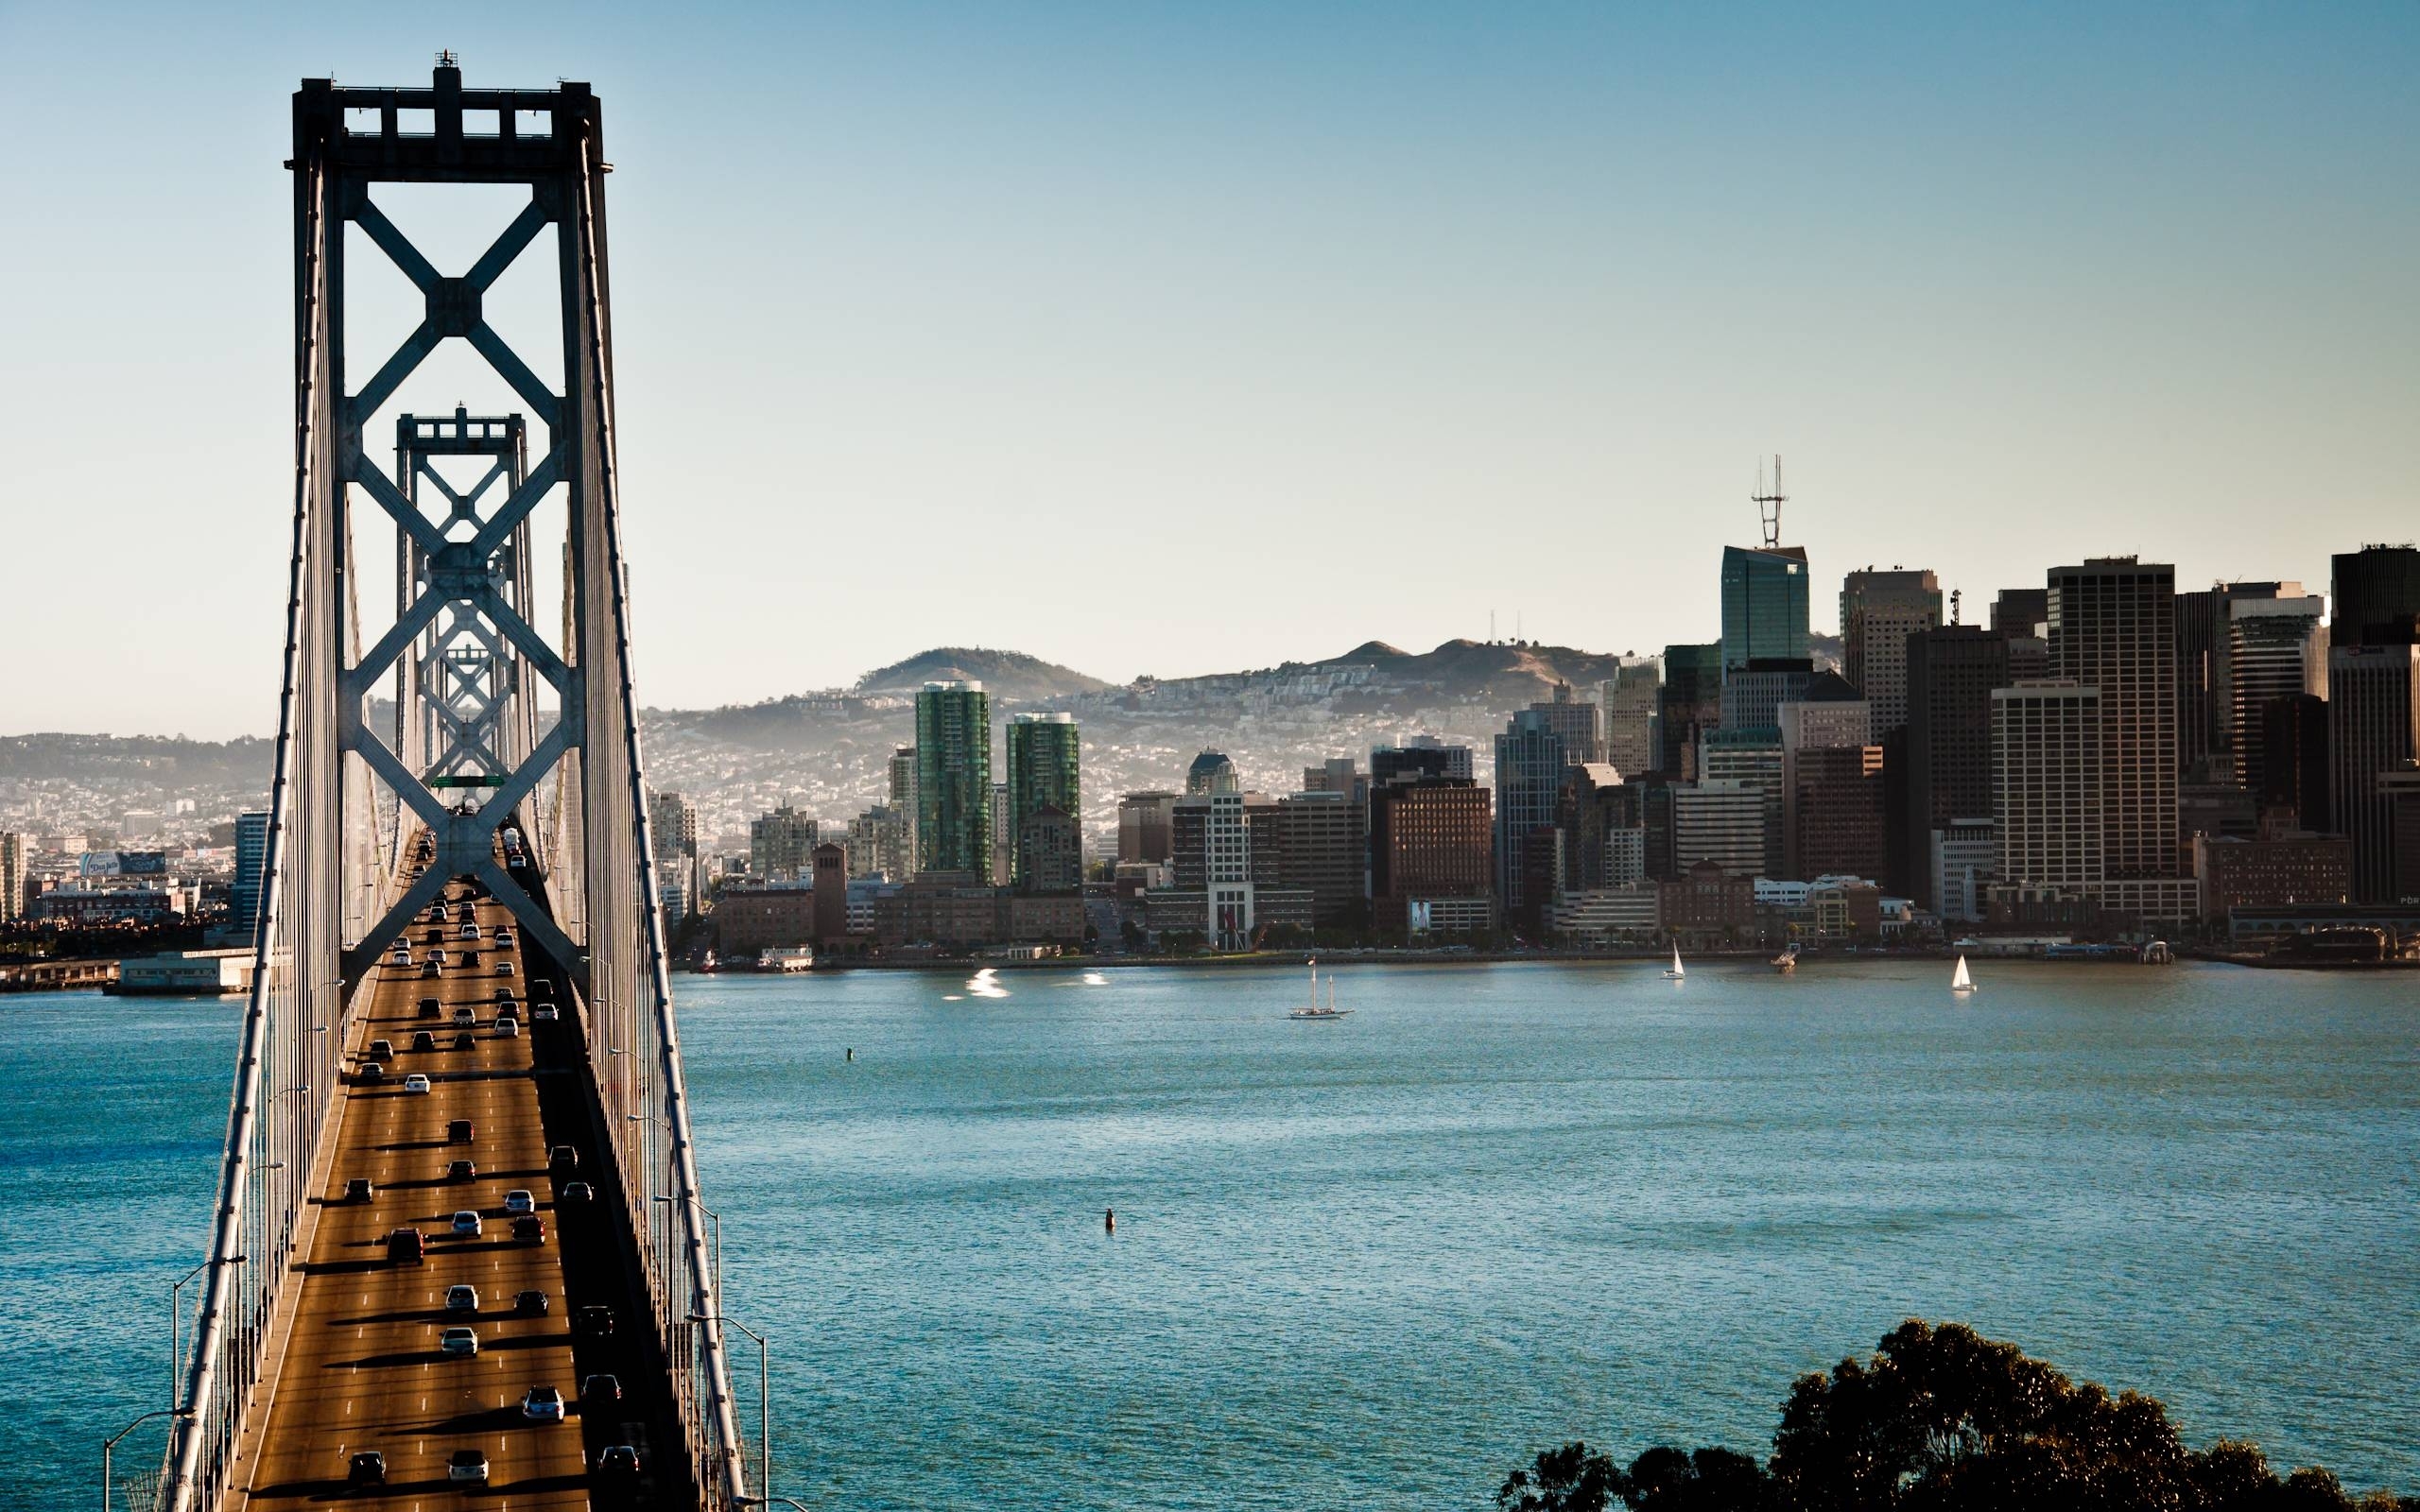 10 Latest Hd San Francisco Wallpaper FULL HD 1920×1080 For PC Background